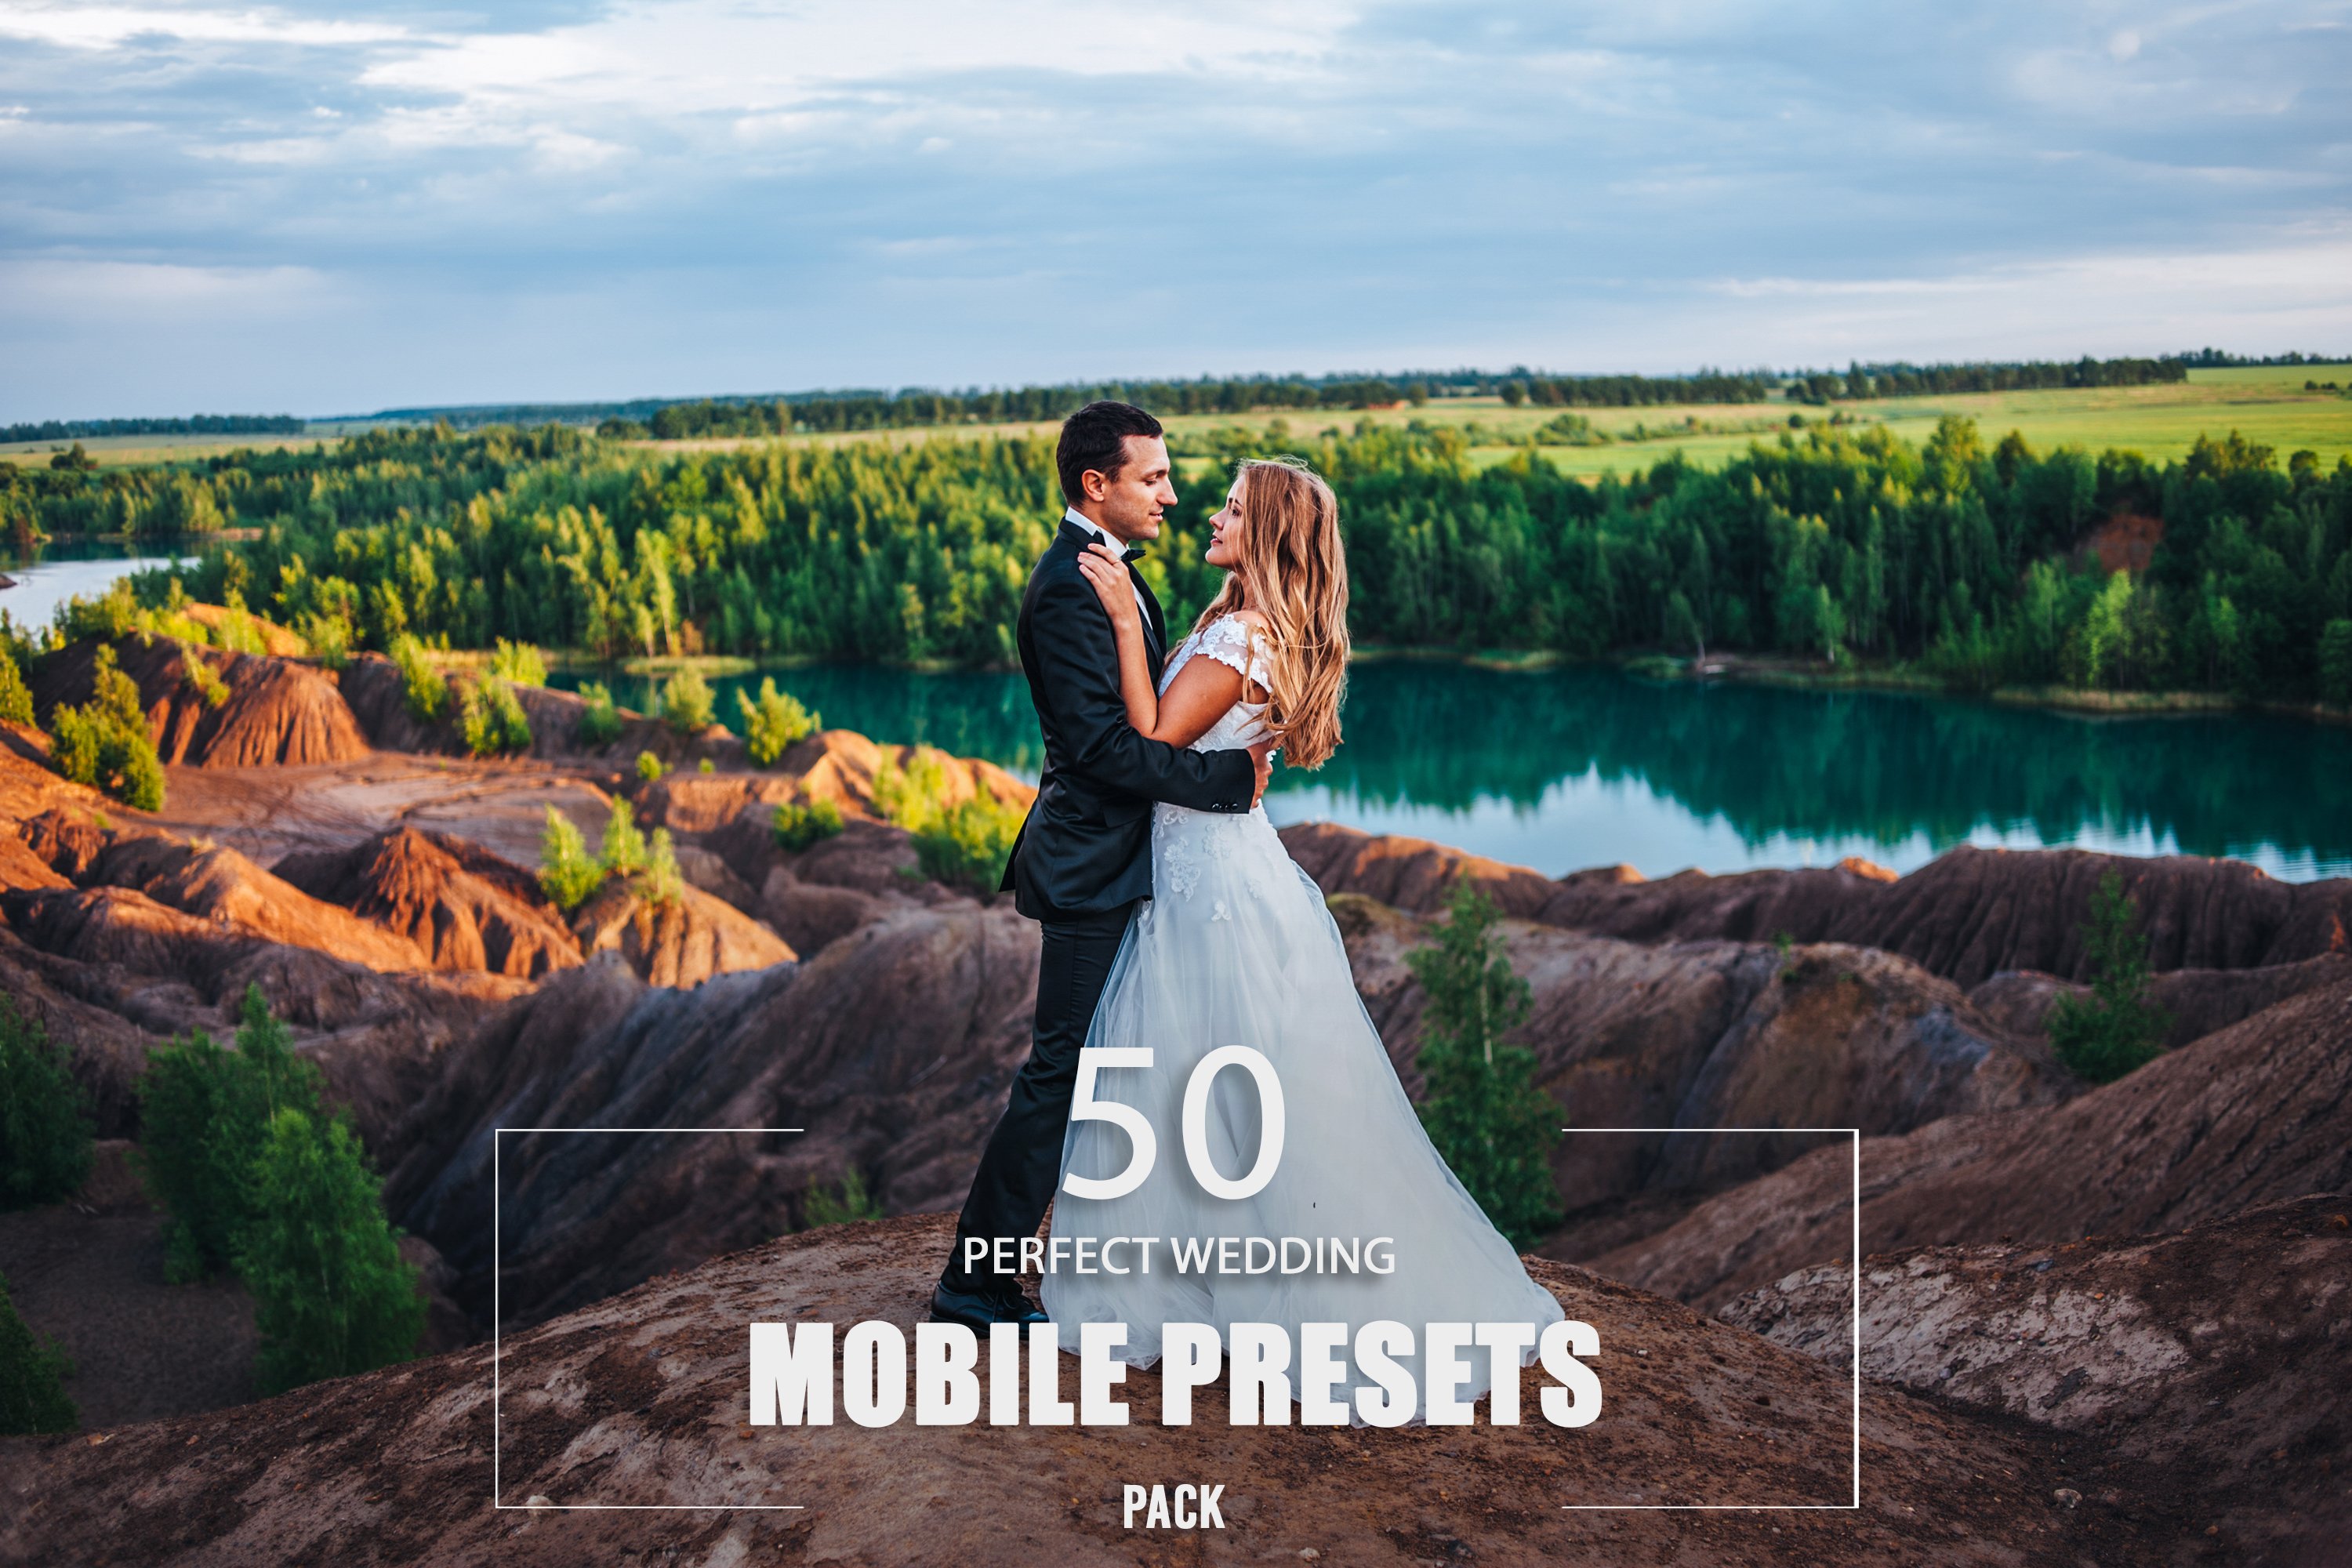 50 Perfect Wedding Mobile Presetscover image.